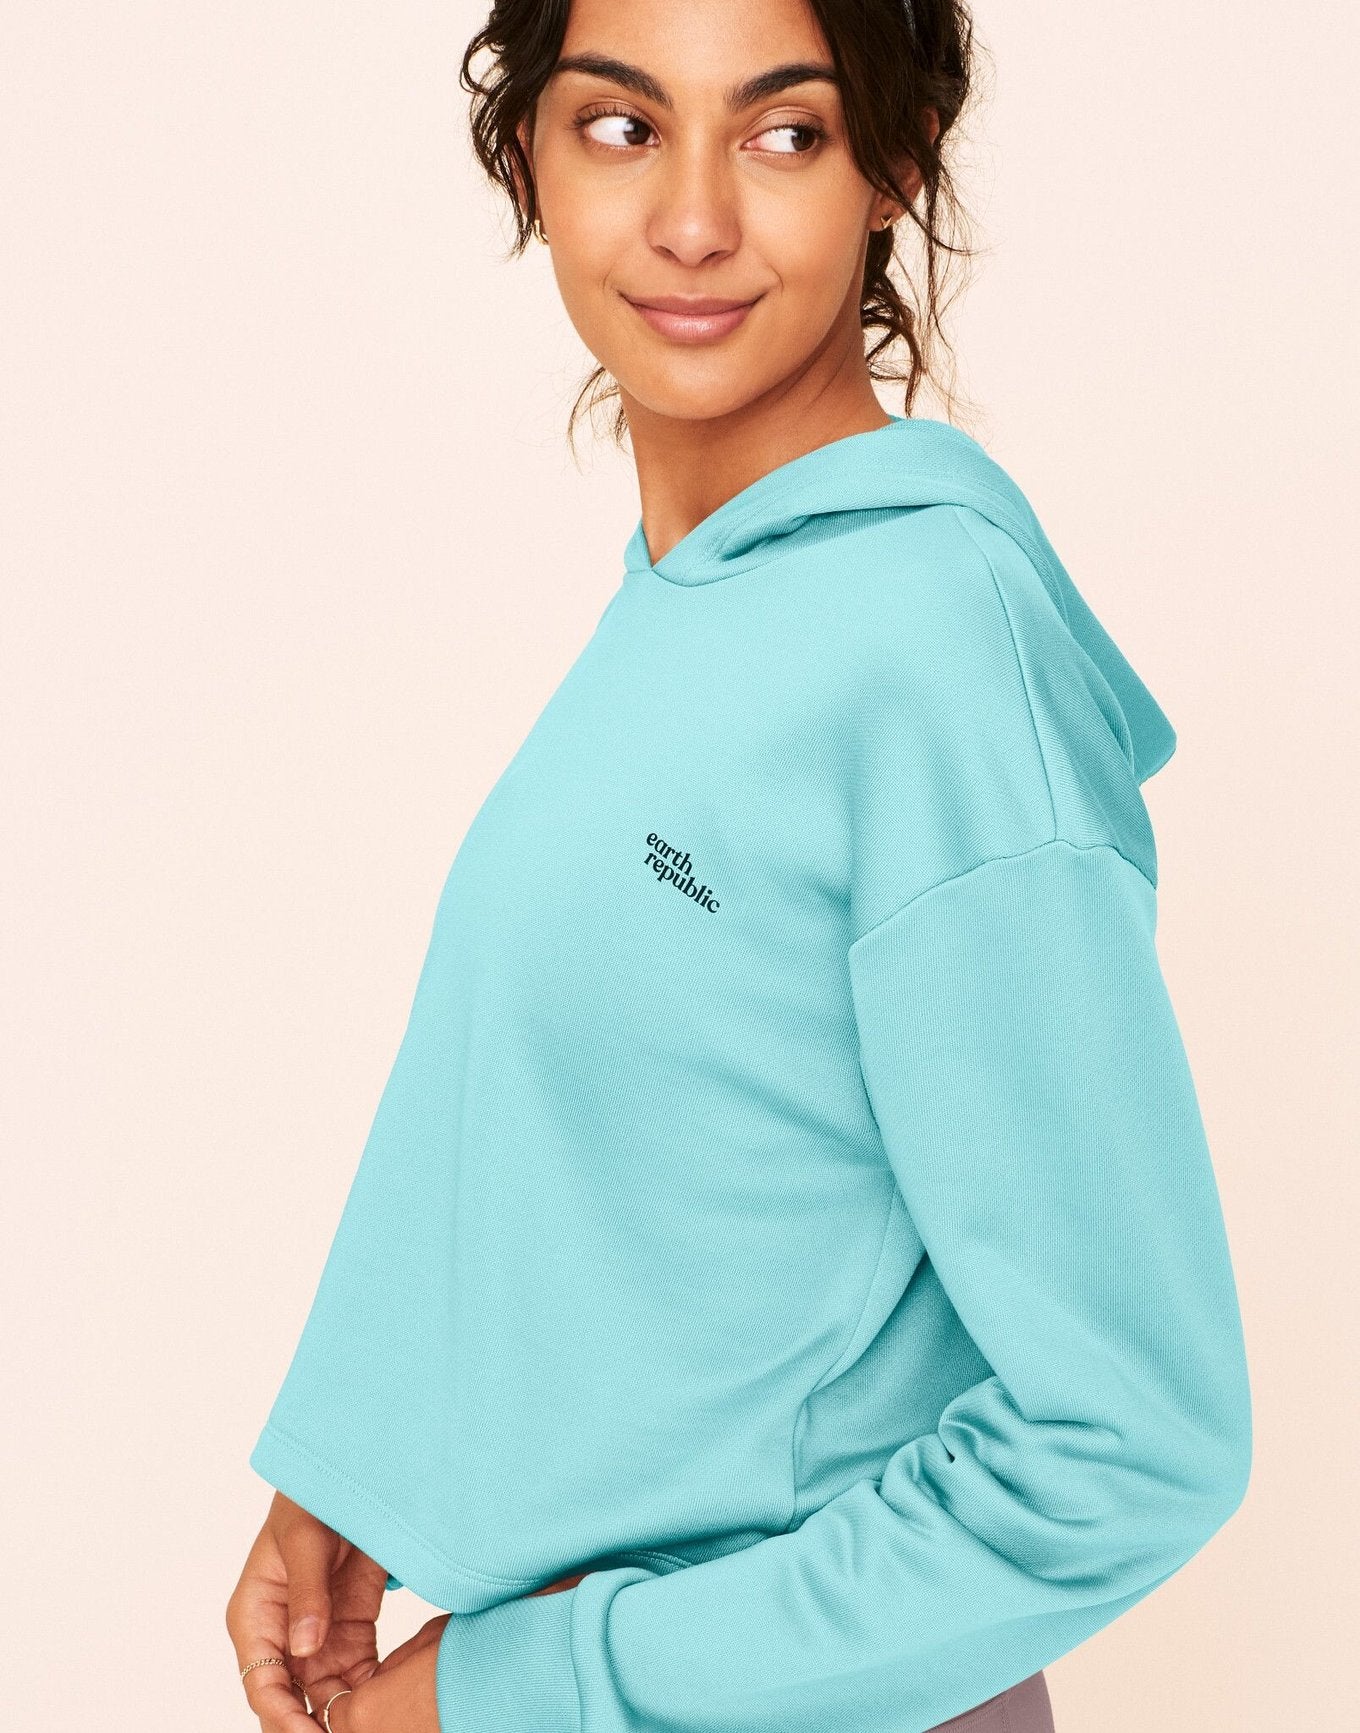 Earth Republic Myah Escape Luxe Hoodie Cropped Hoodie in color Island Paradise and shape hoodie